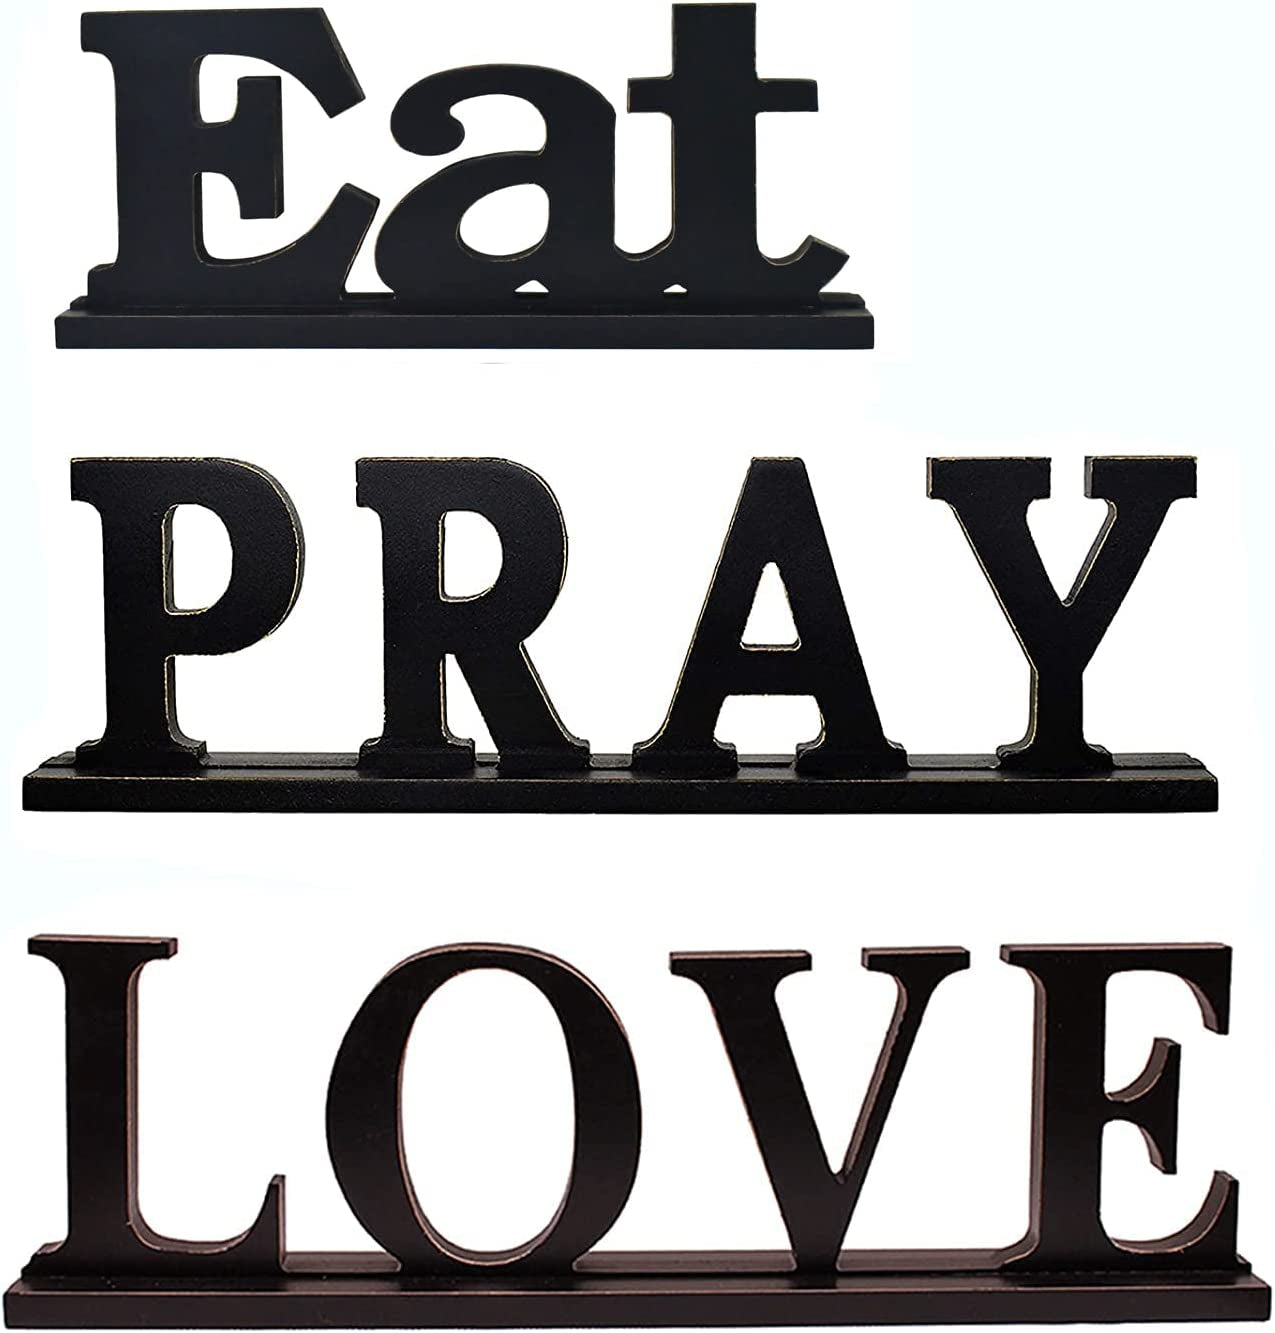 Eat Pray Love Sign for Home Decor Rustic Wood Words Freestanding Decorative Tabletop Cutout Letter Sign